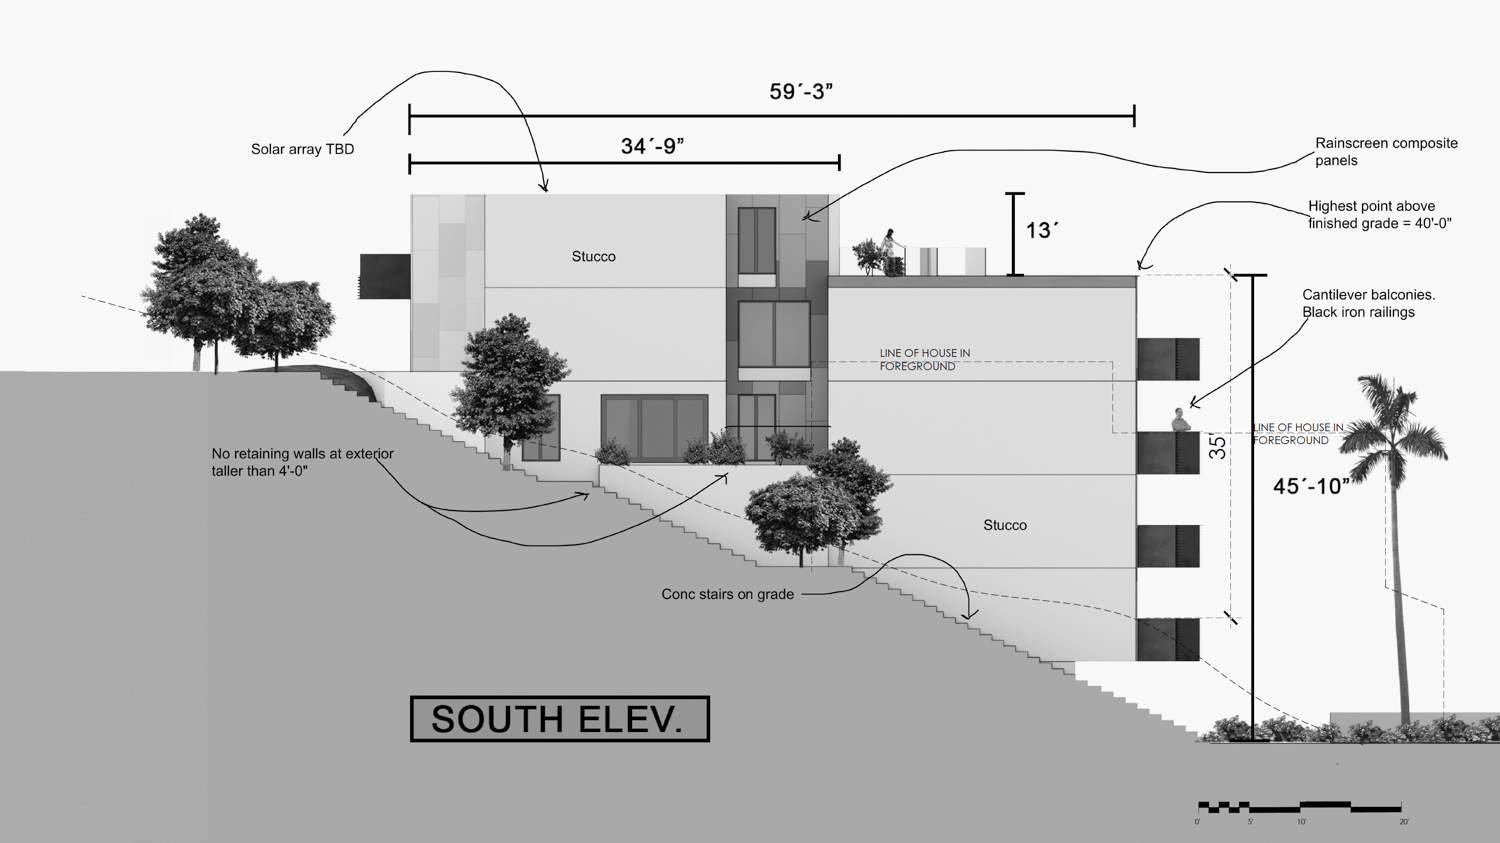 4981 MacArthur Boulevard vertical cross-section, elevation by McMahon Architects Studio